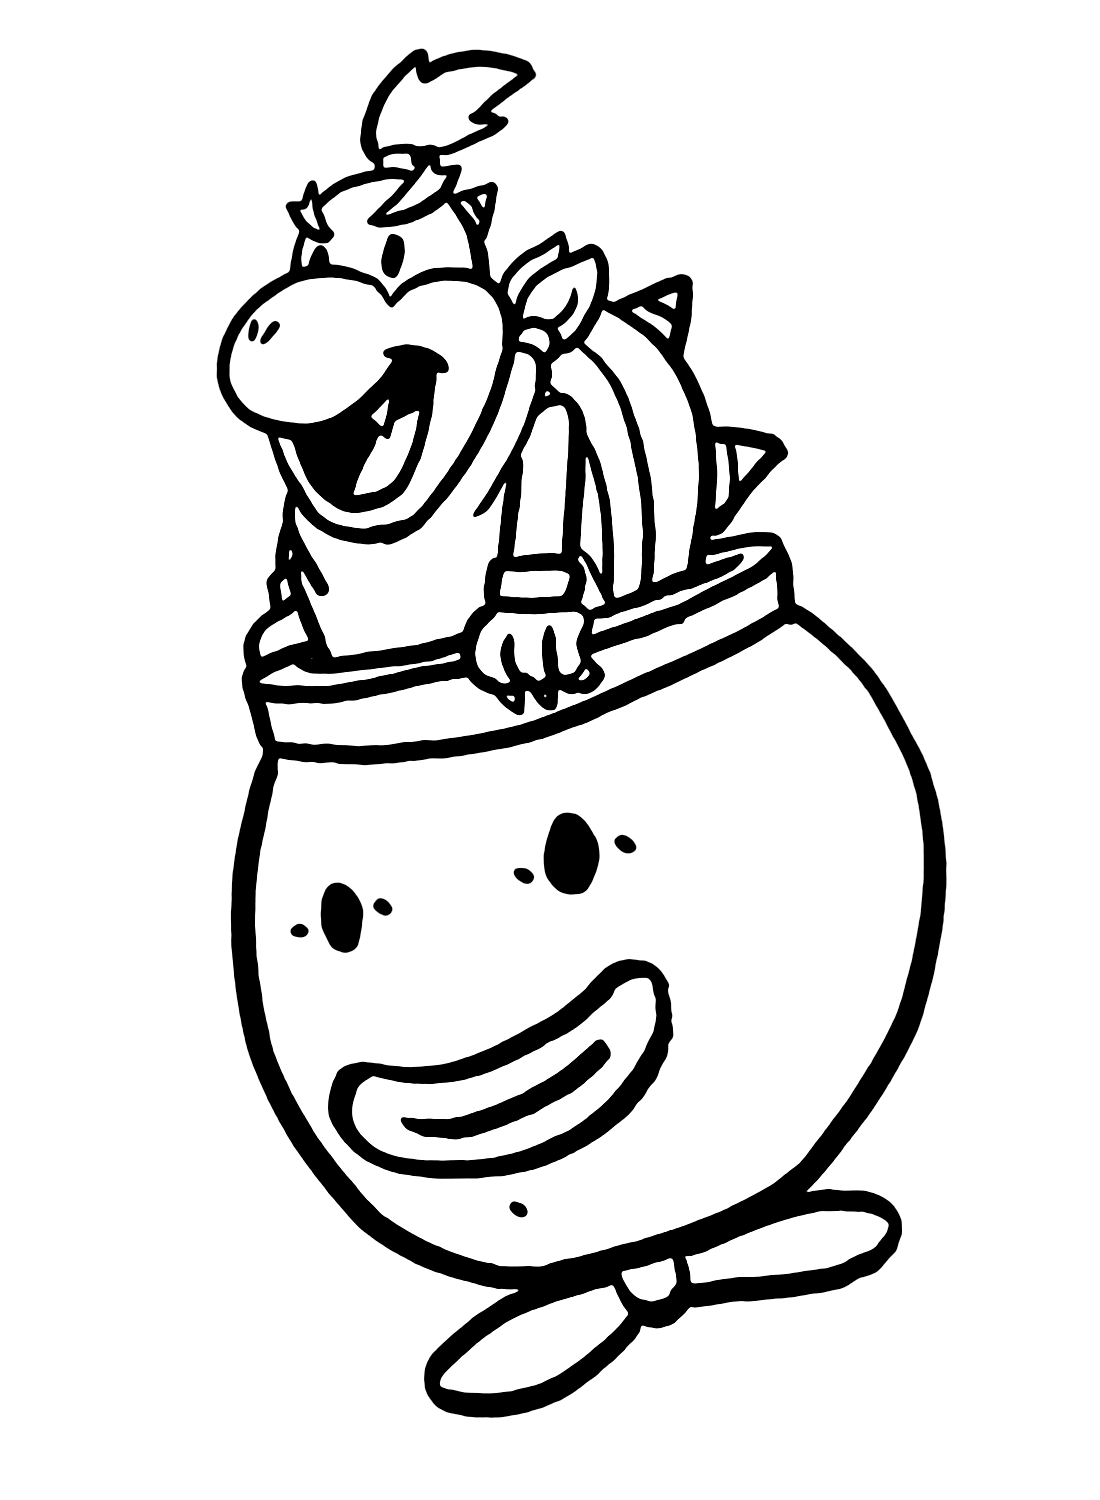 Bowser Jr in Super Mario Coloring Page